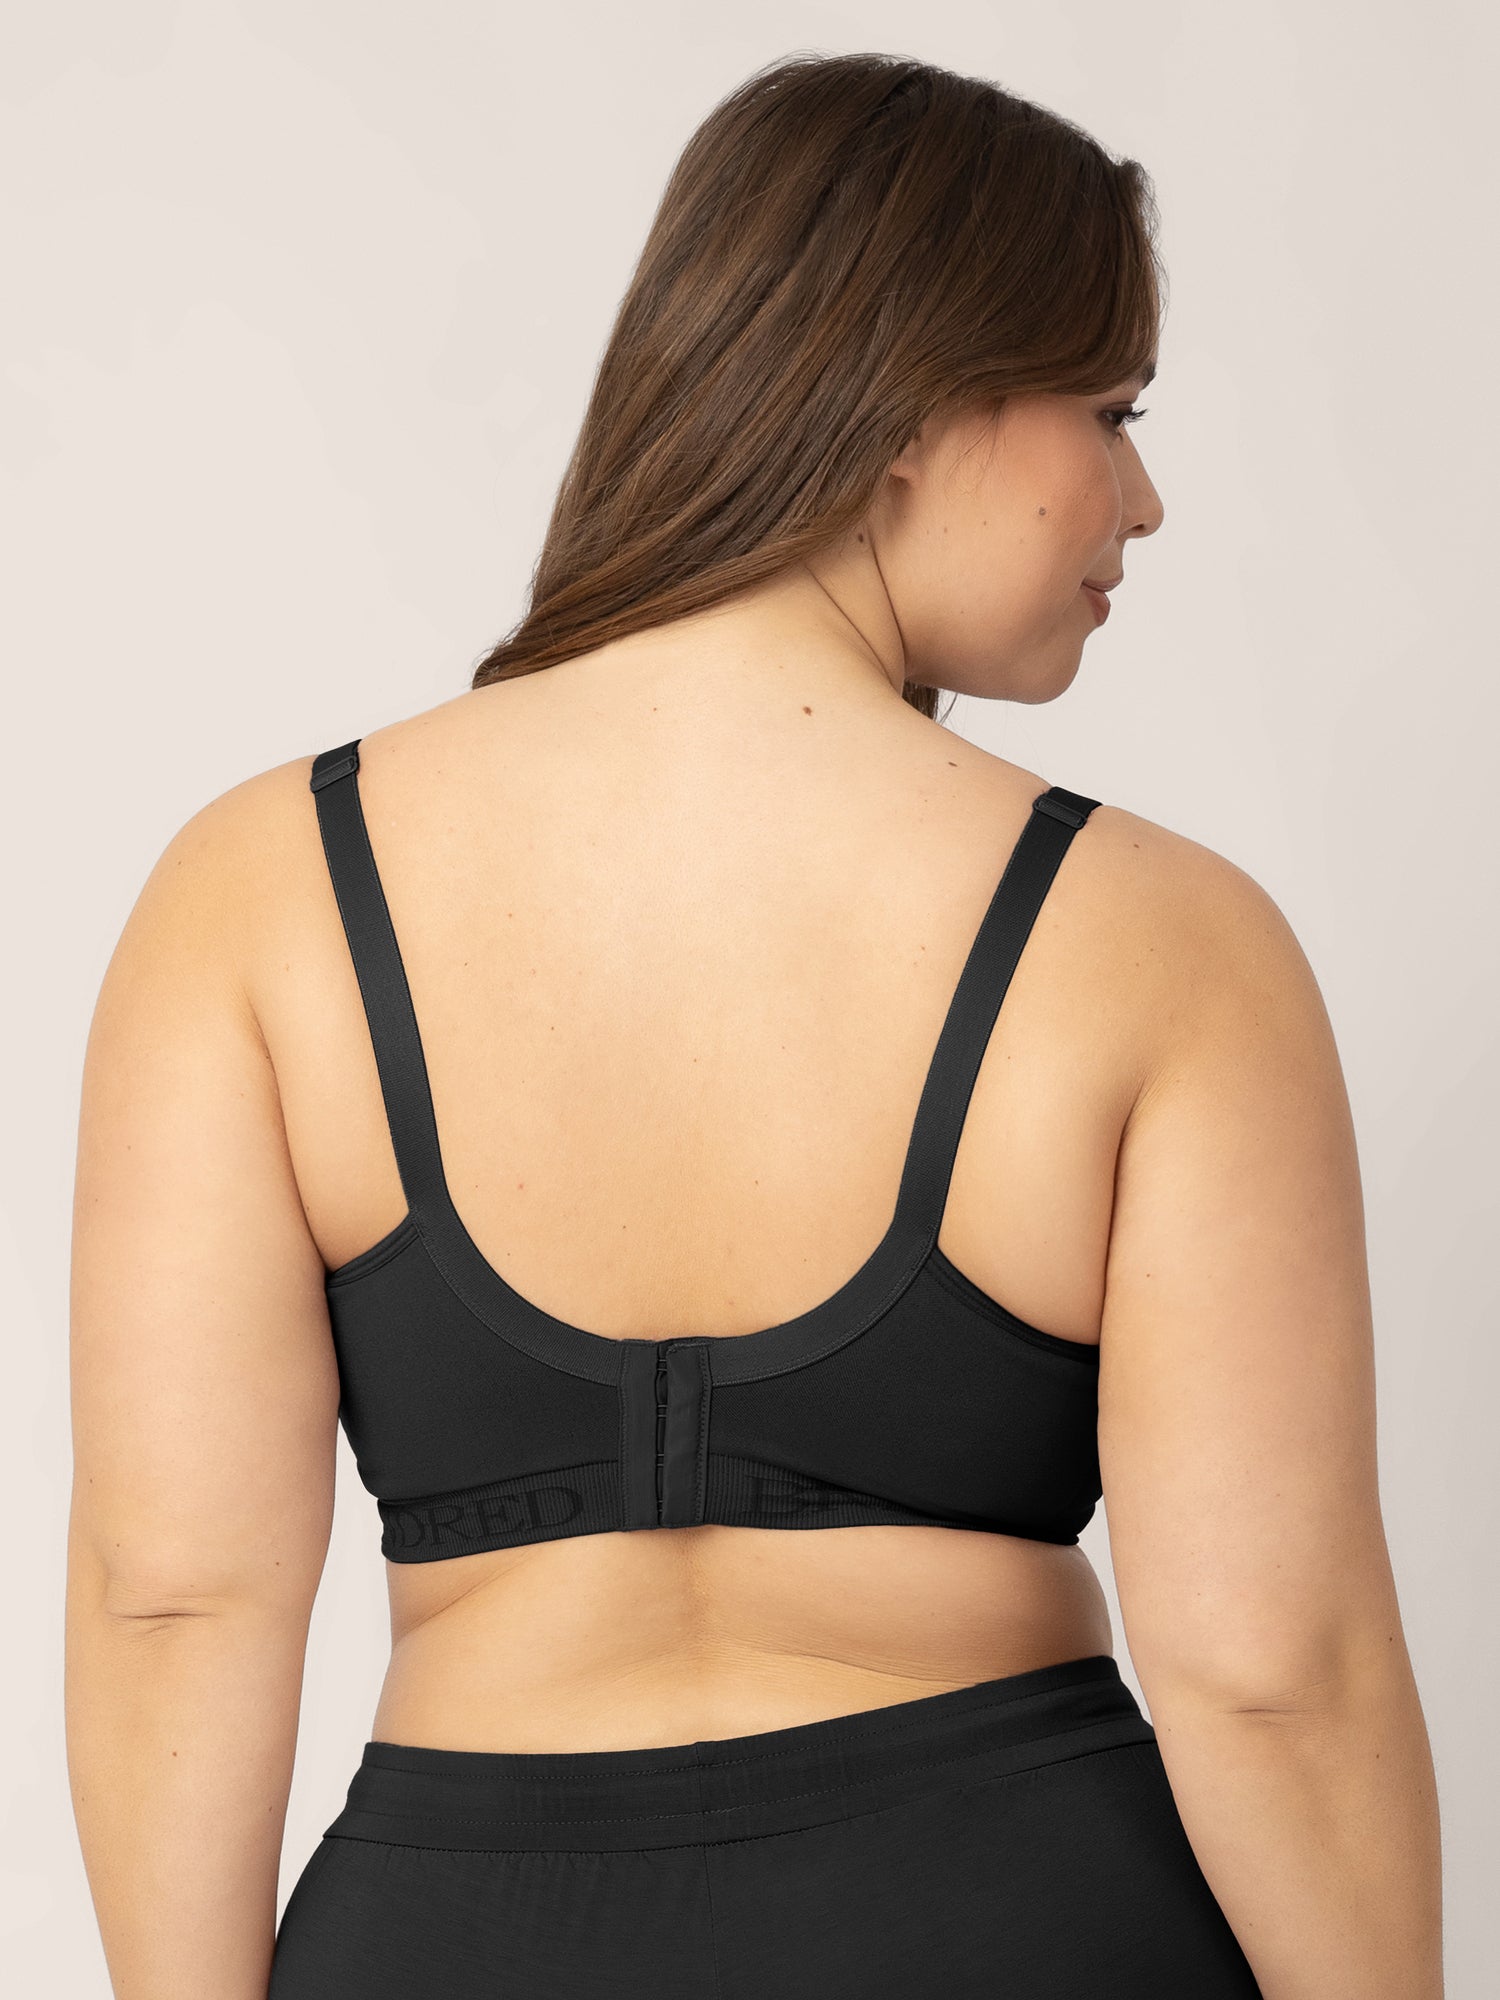 Kindred Bravely Minimalist Busty Nursing T-Shirt Bra  Convertible  Racerback Nursing Bra for F, G, H, I Cups (Black, X-Small-Busty) at   Women's Clothing store